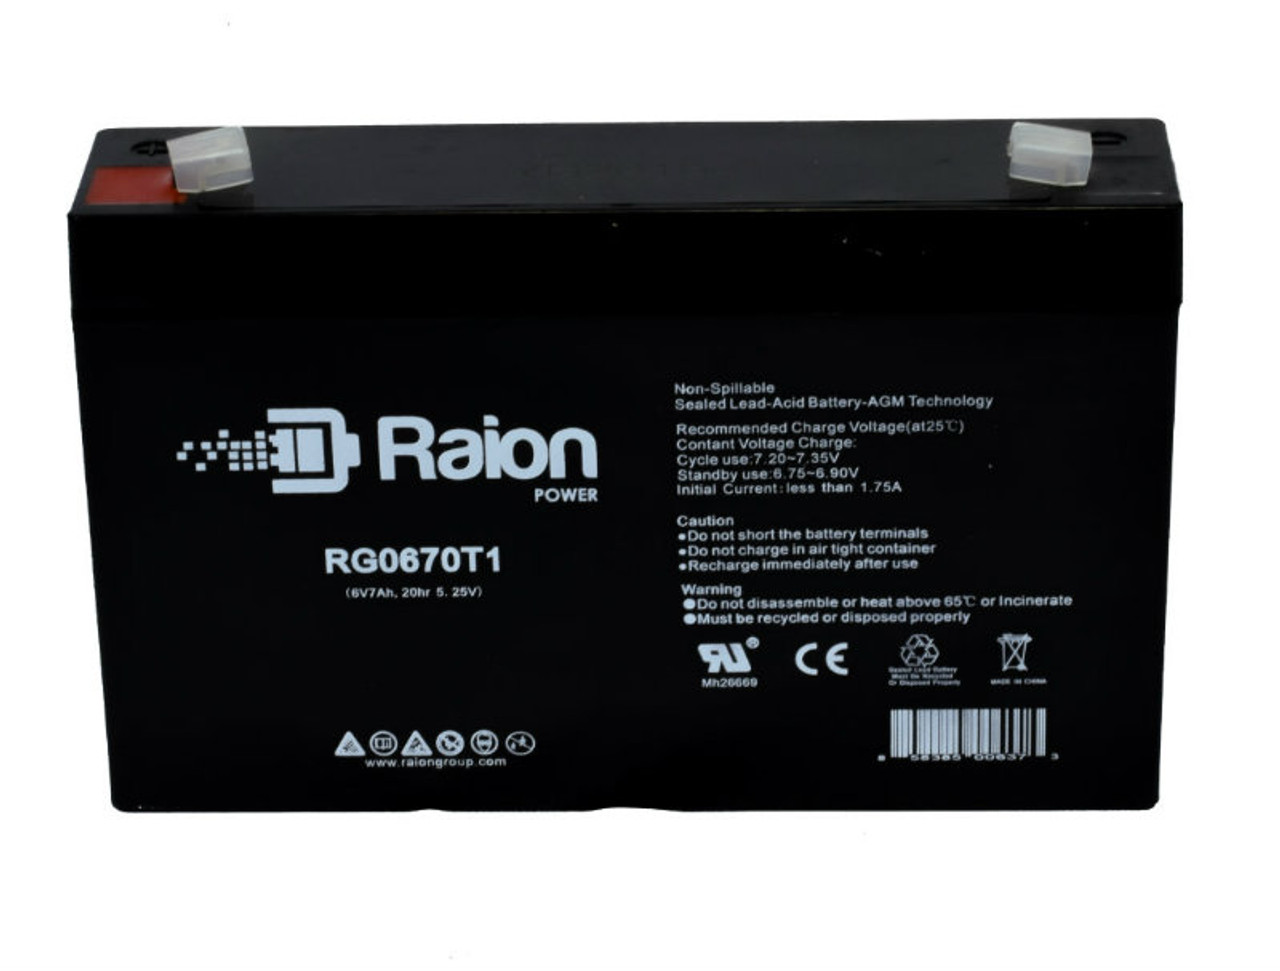 Raion Power RG0670T1 Replacement Battery Cartridge for Light Alarms SGLD